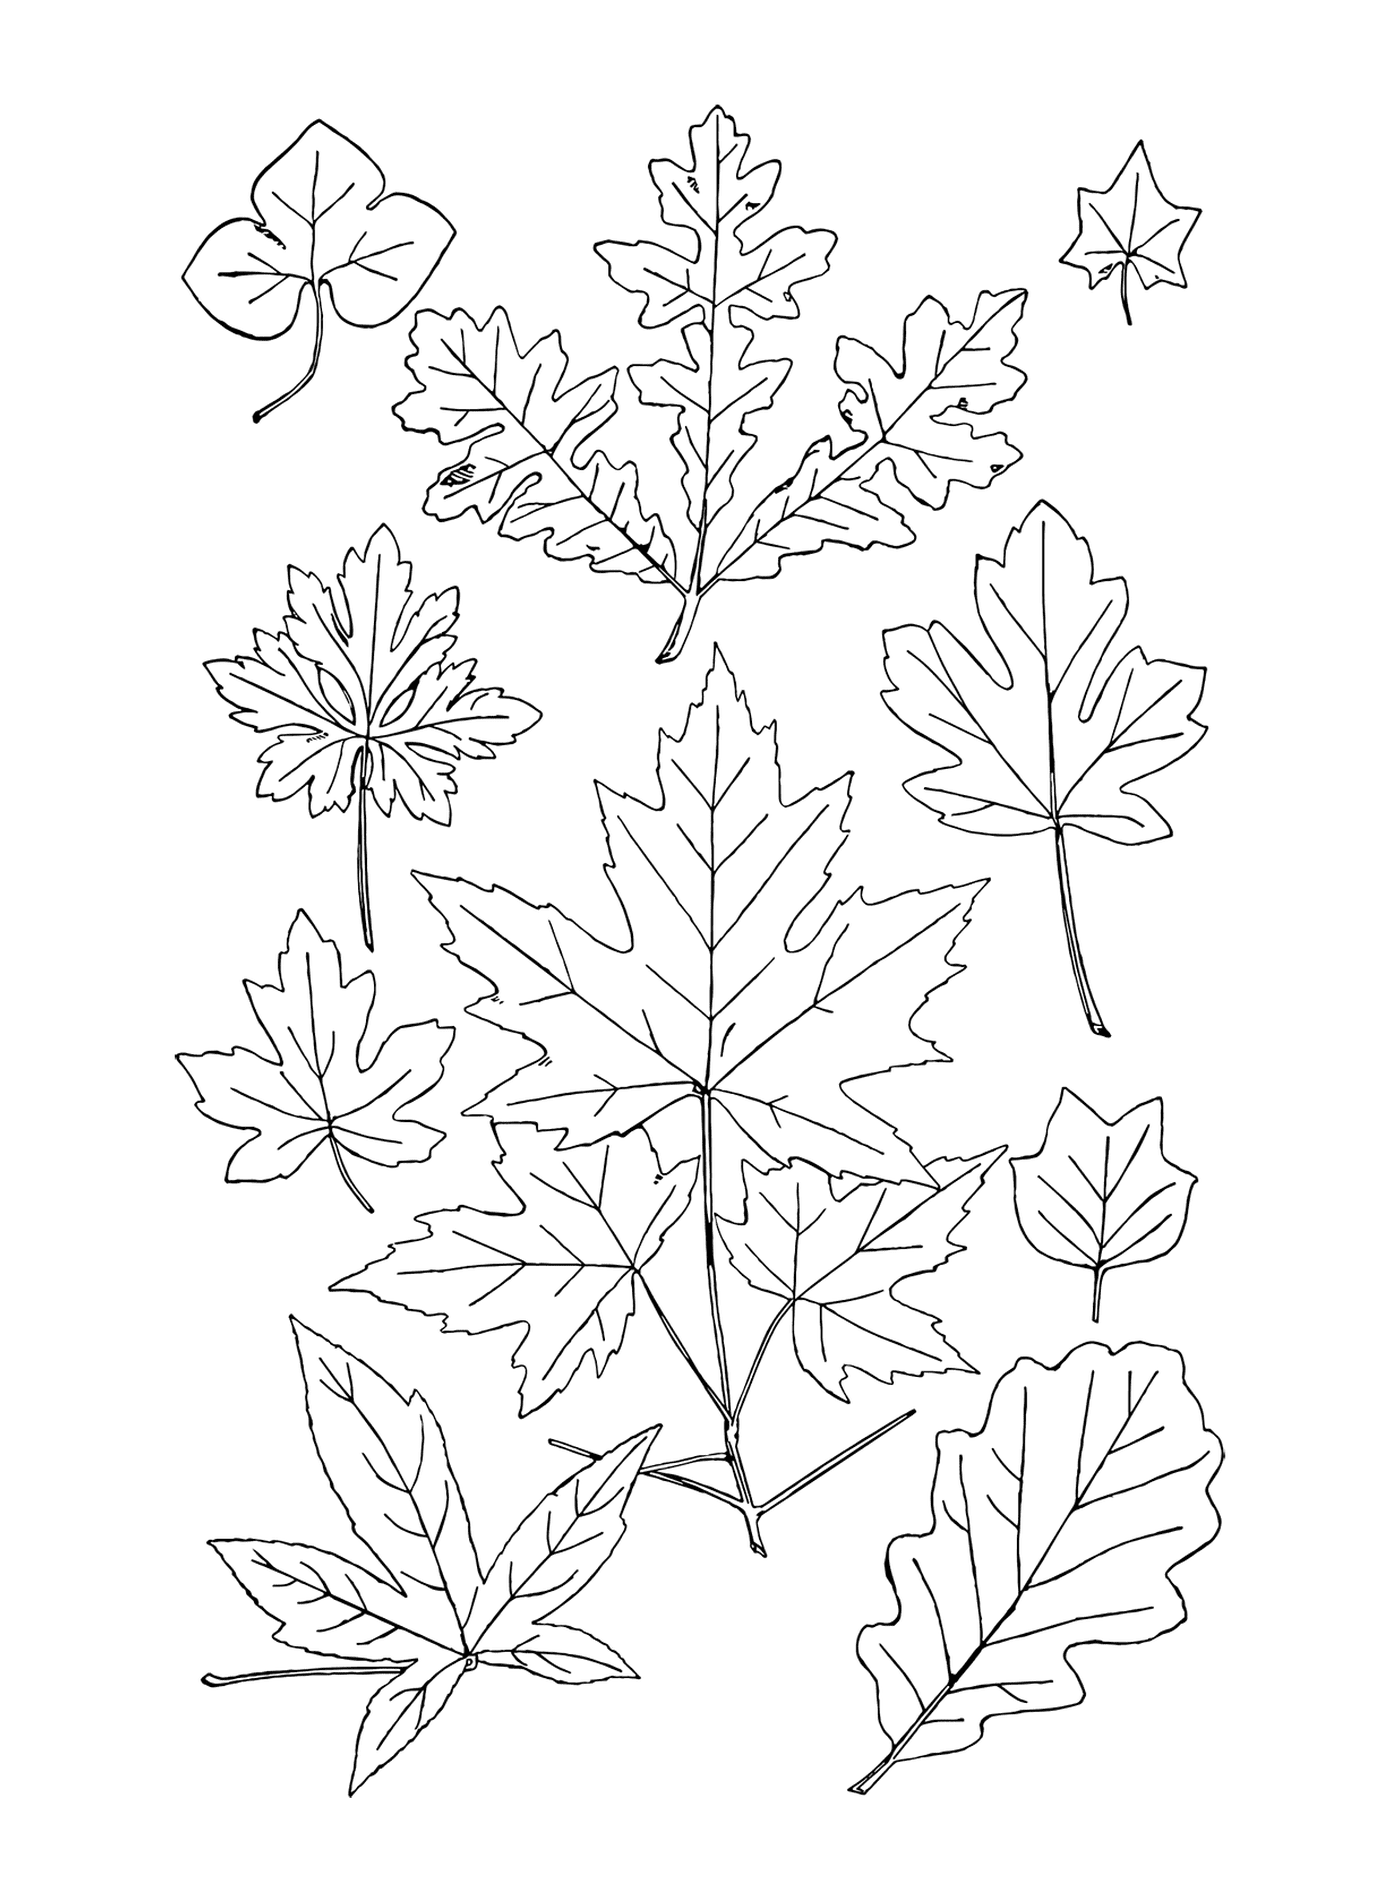  A line of leaves 